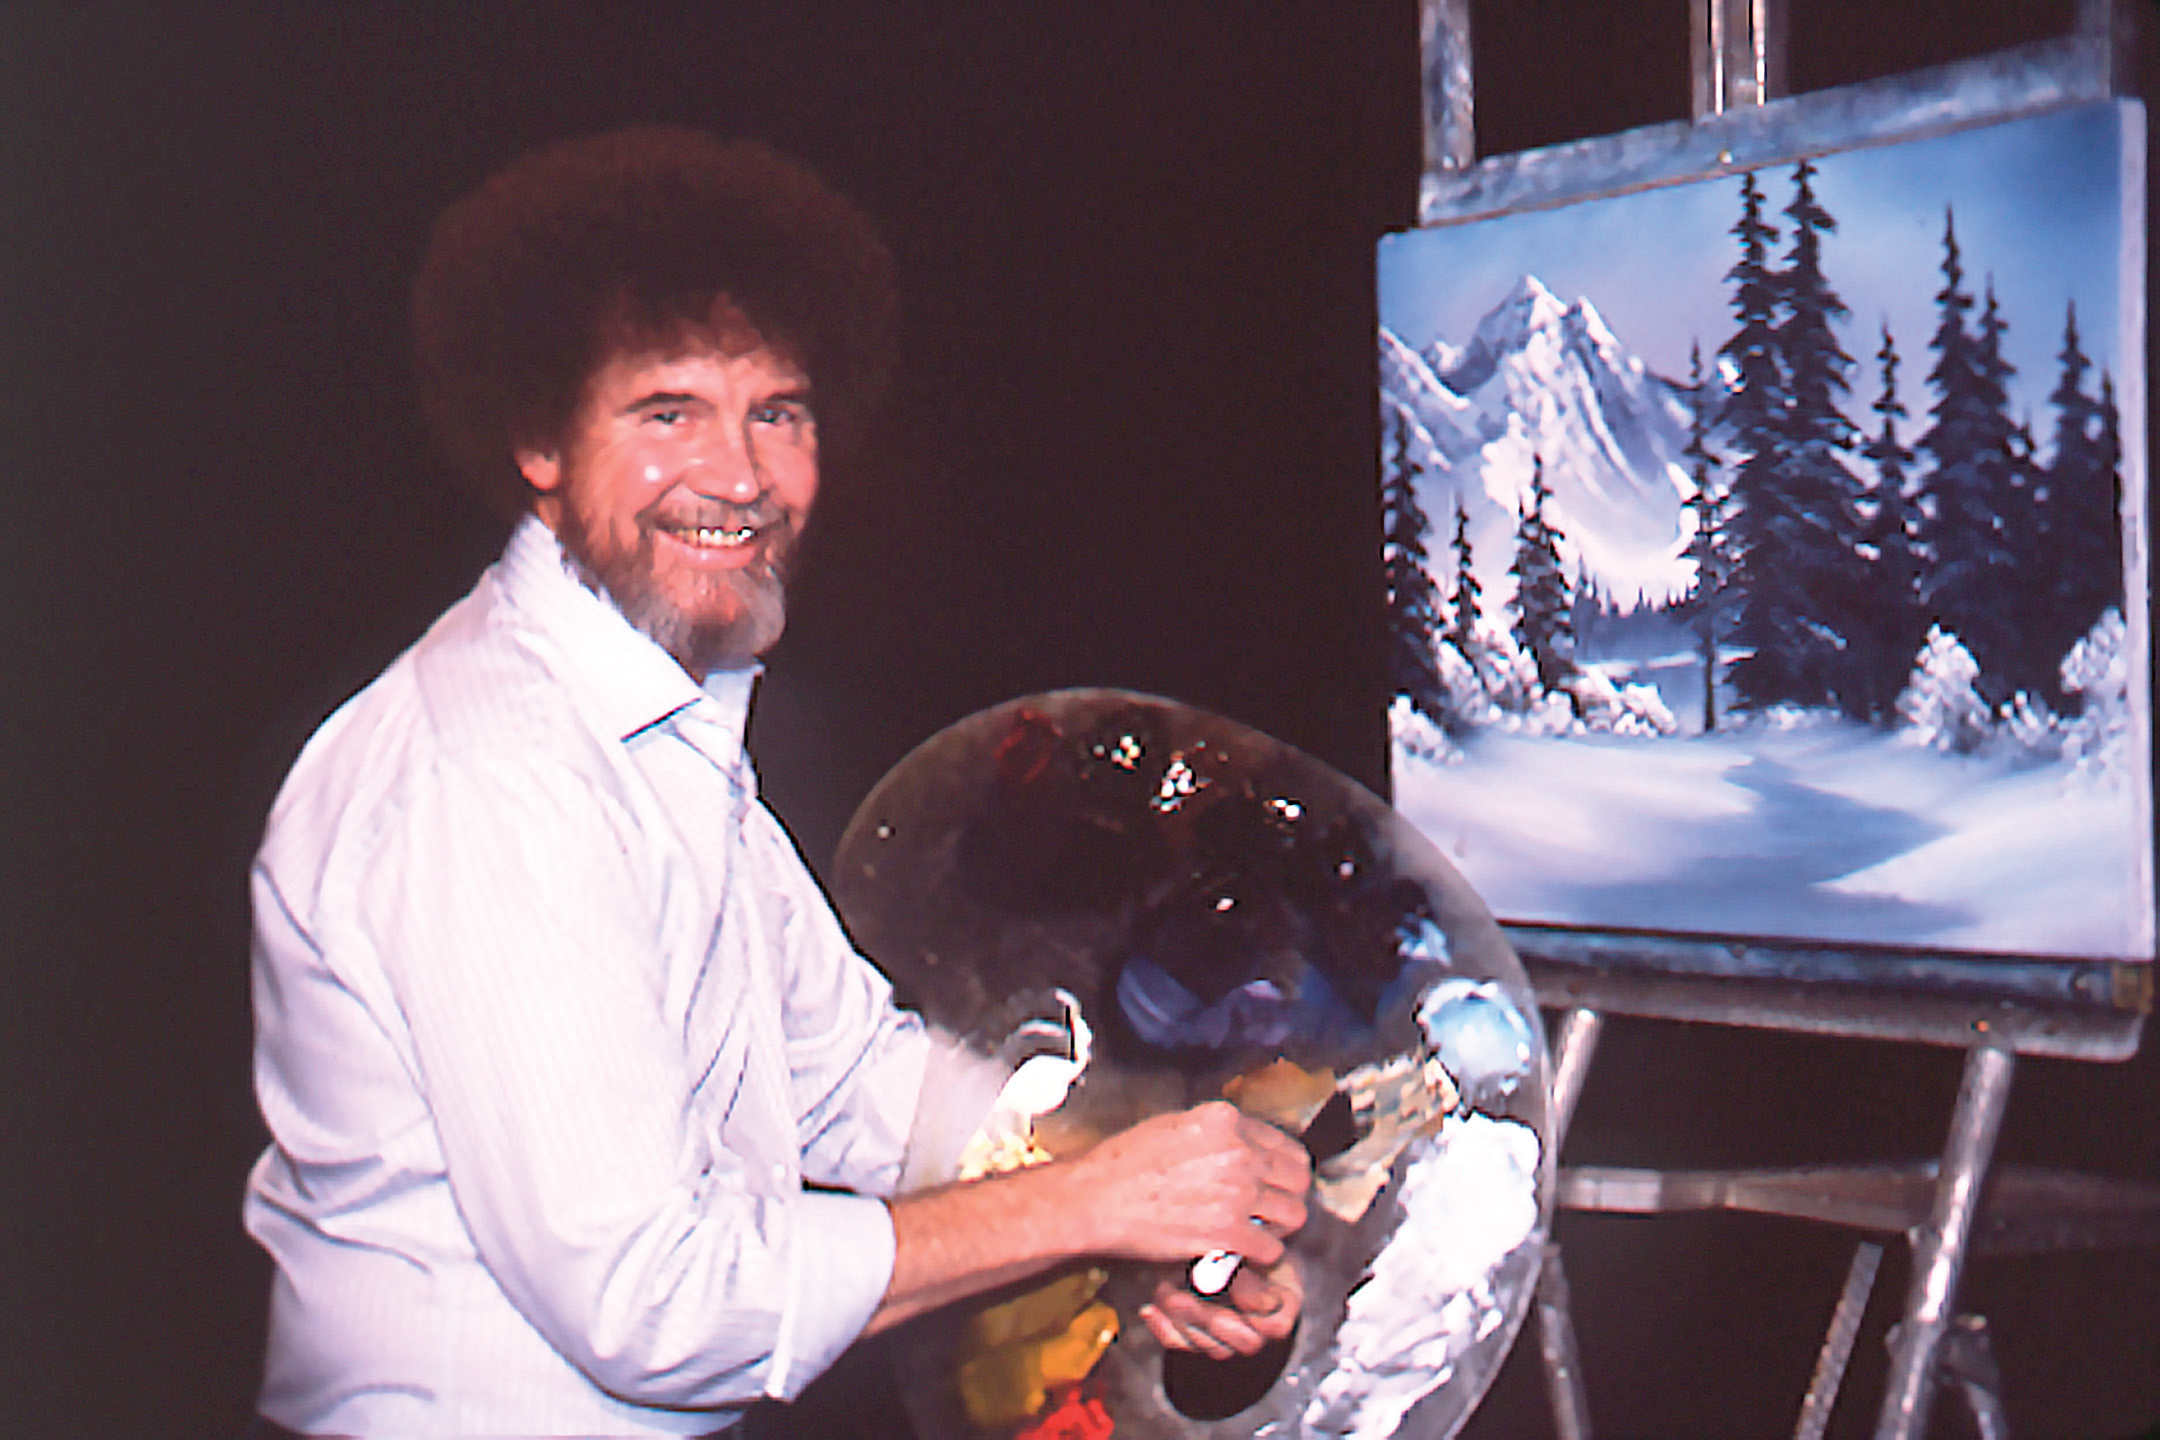 A photo of Bob Ross holding a painting palette in front of a painting of a winter mountain scene on the set of his television show